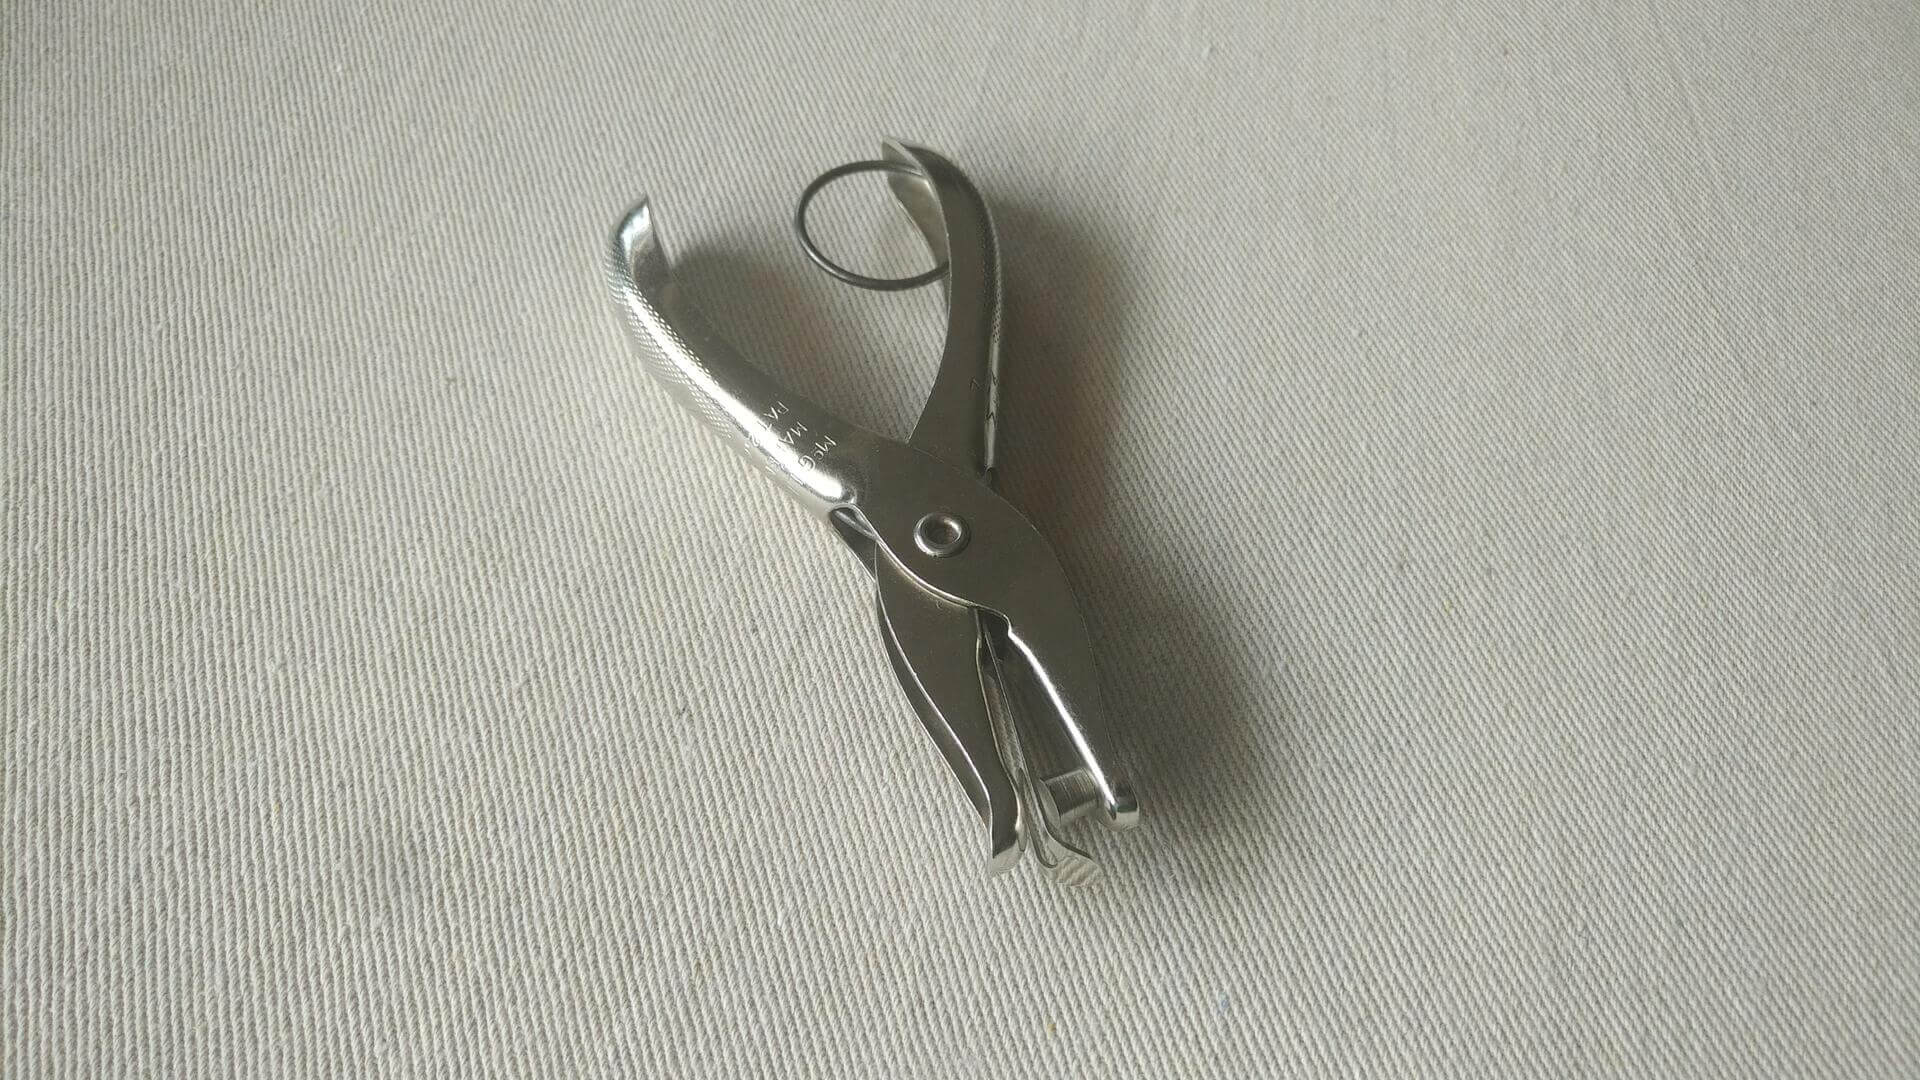 Vintage Gem handheld ticket & single hole paper punch by McGill Metal Products Co Marengo, IL. Antique made in USA office tools and stationery collectible.